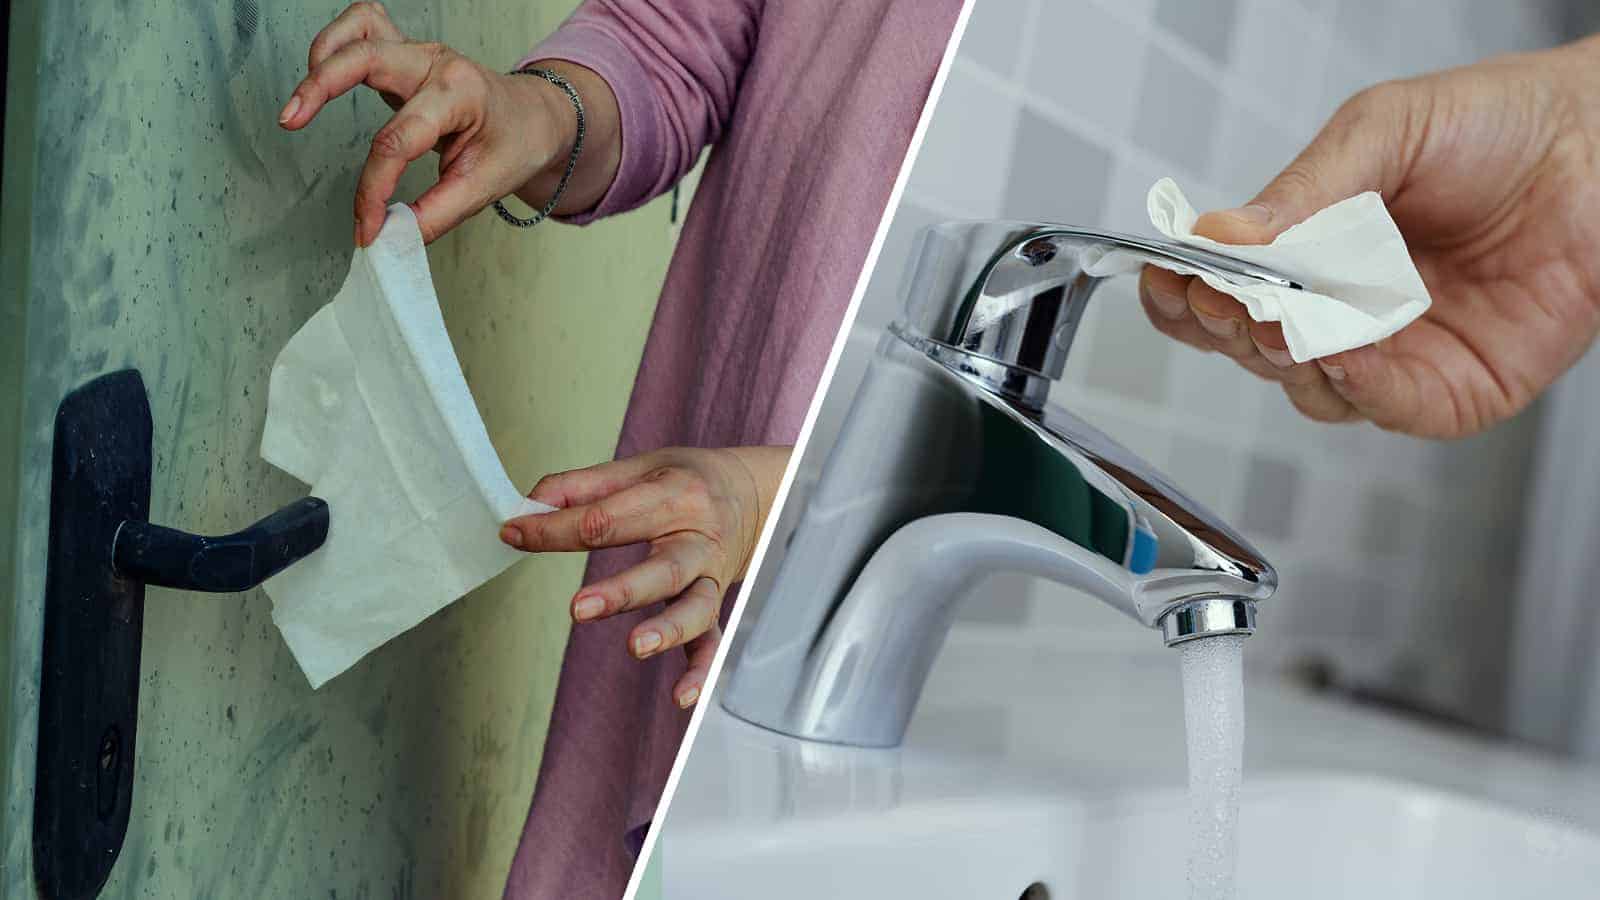 Why Do People Fear Germs? 10 Symptoms of Mysophobia